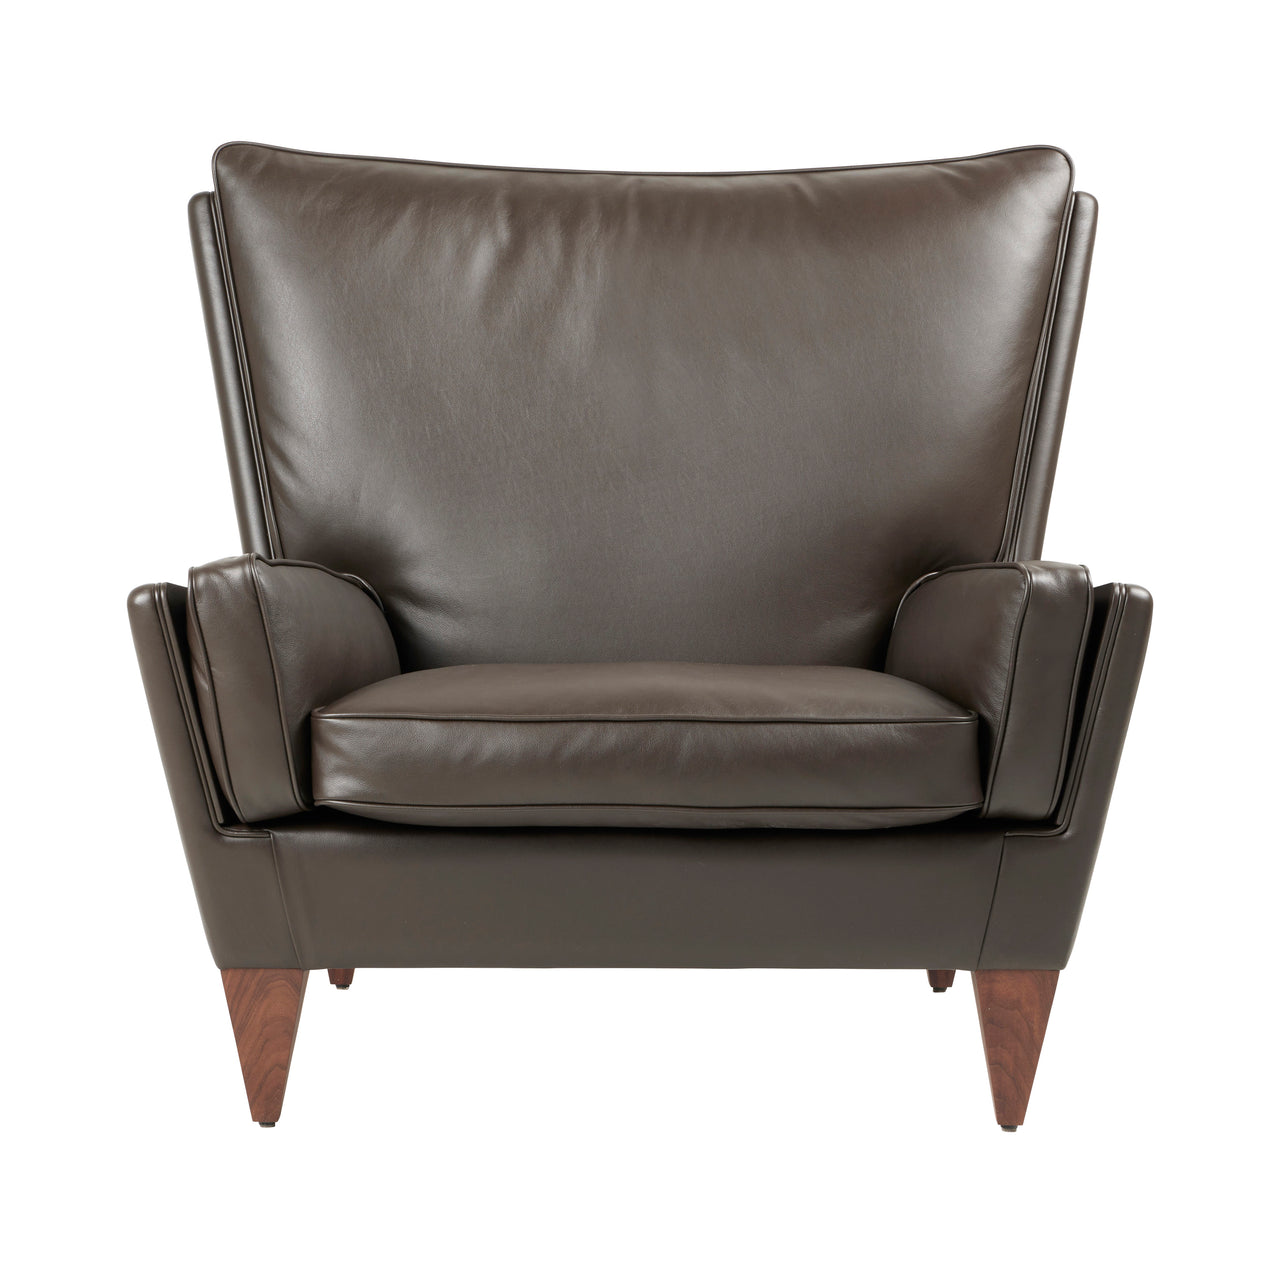 V11 Lounge Chair: Solid American Walnut